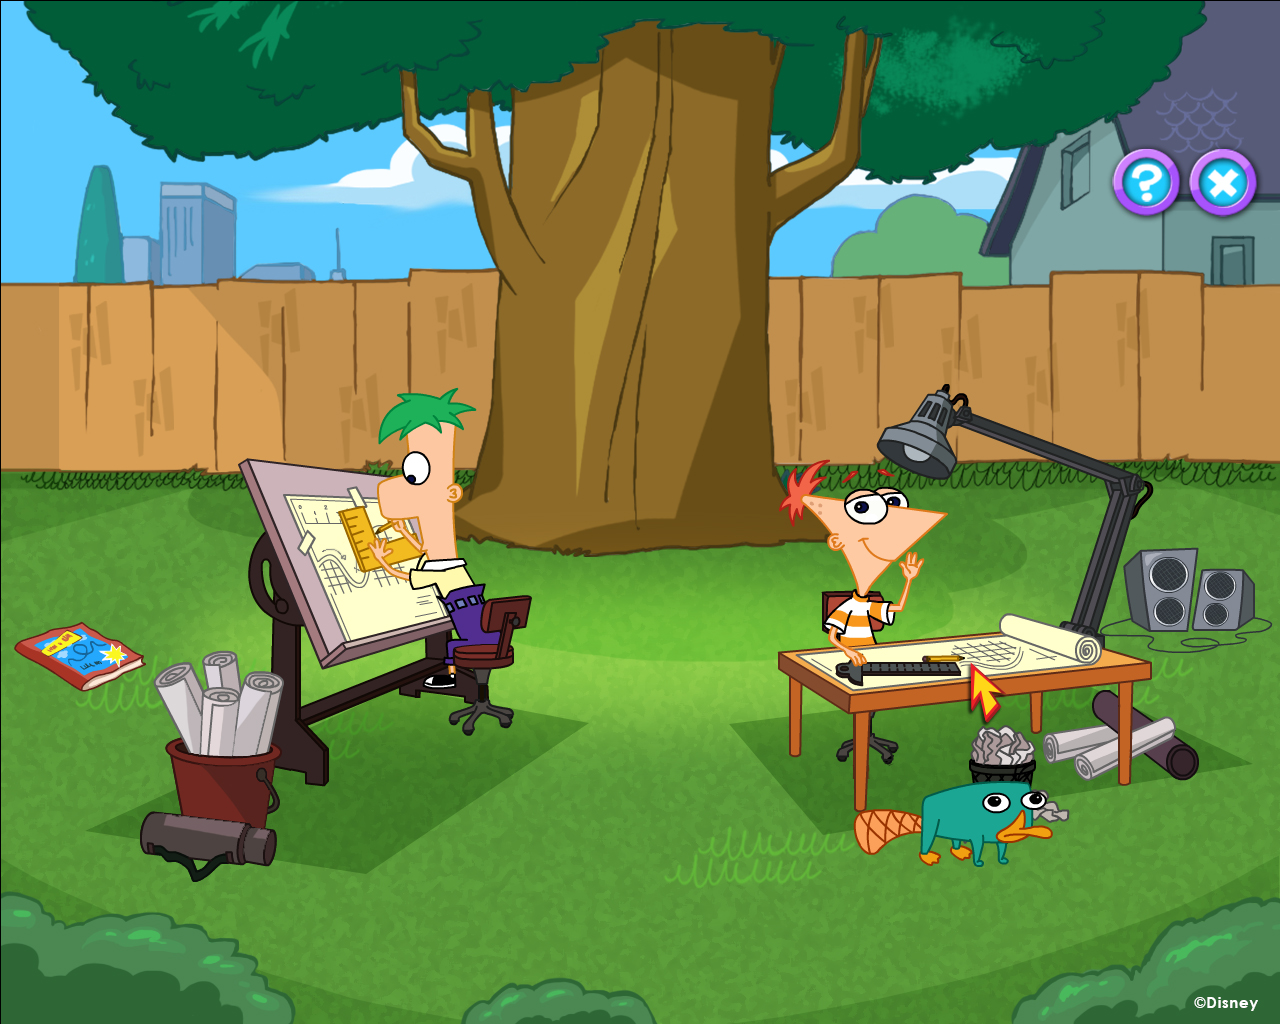 Phineas and Ferb: New Inventions Featured Screenshot #1